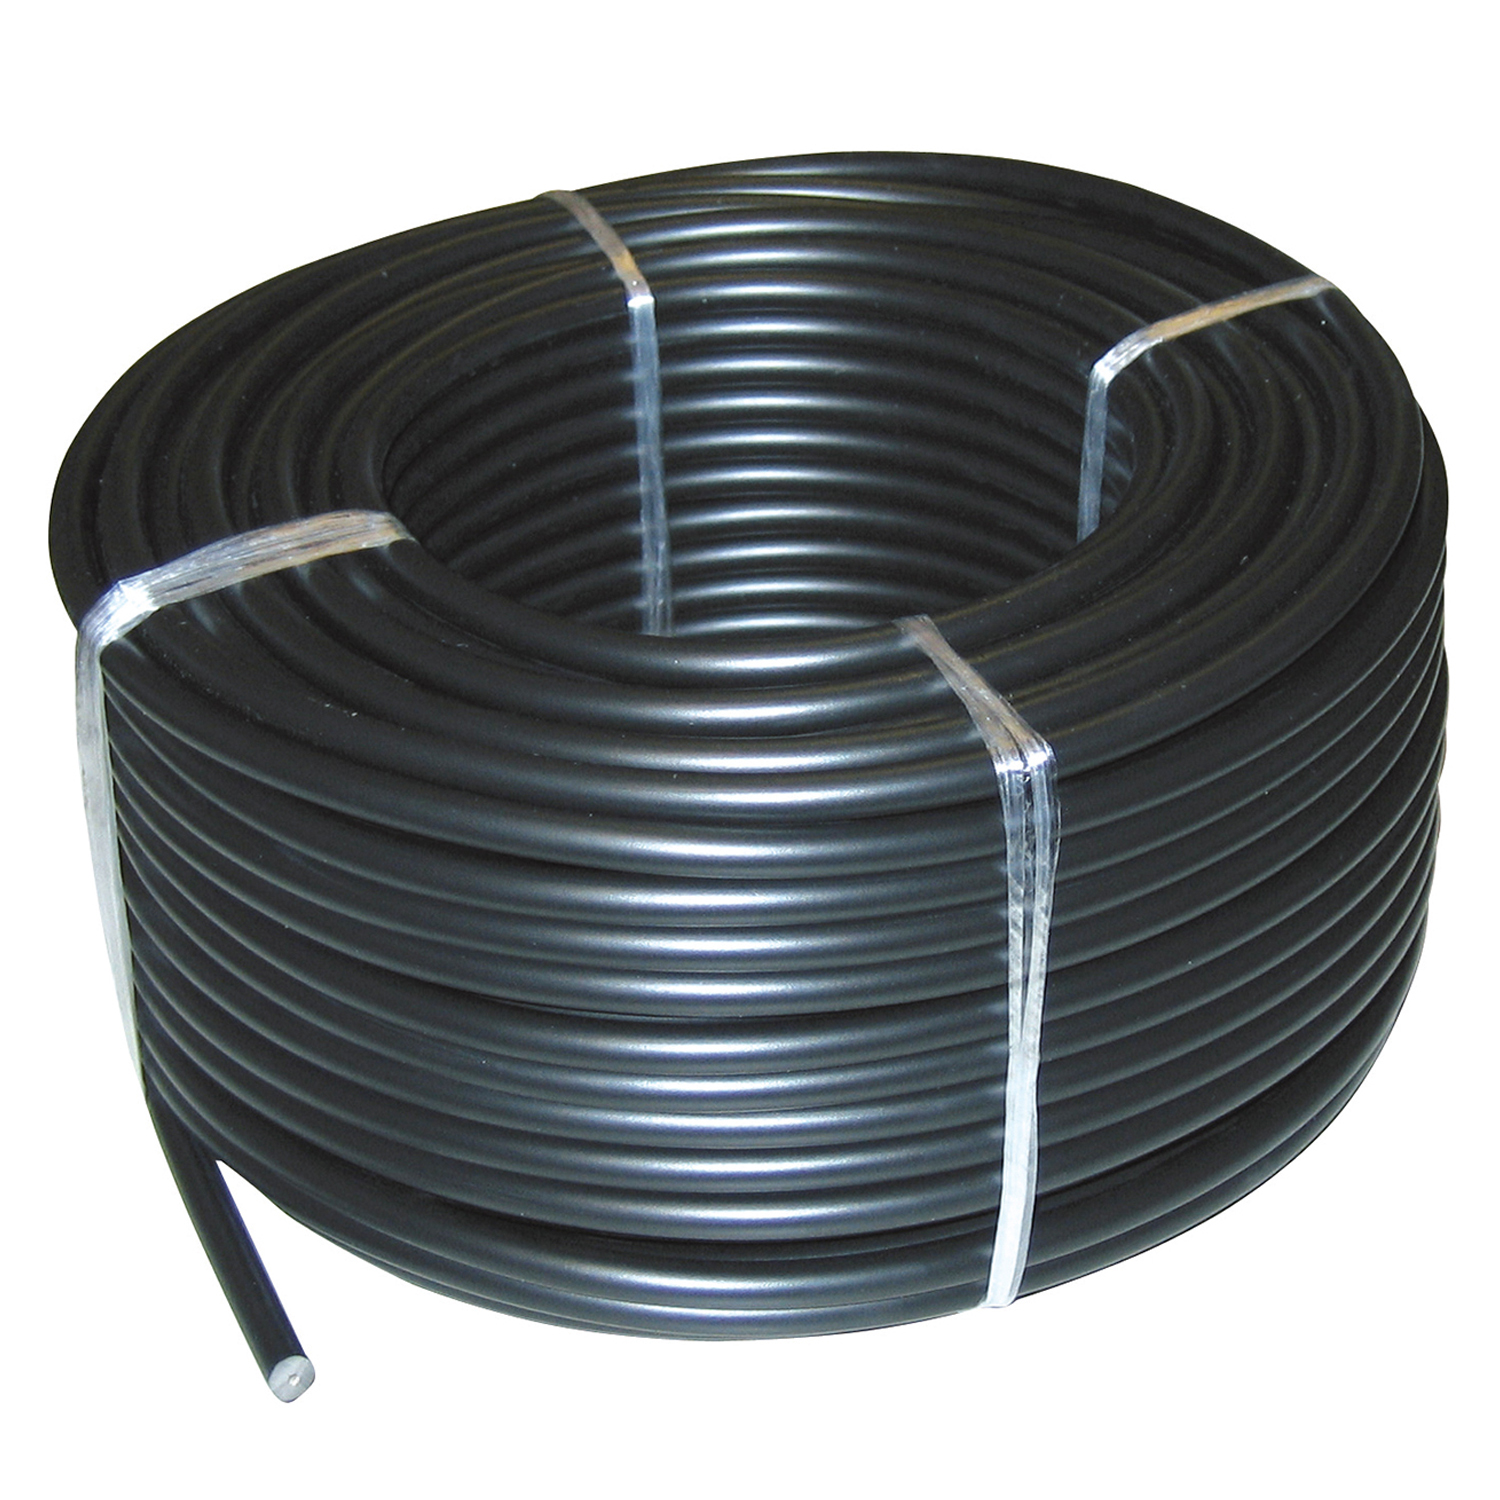 CORRAL HIGH VOLTAGE UNDERGROUND CABLE  25 METRES 25 M